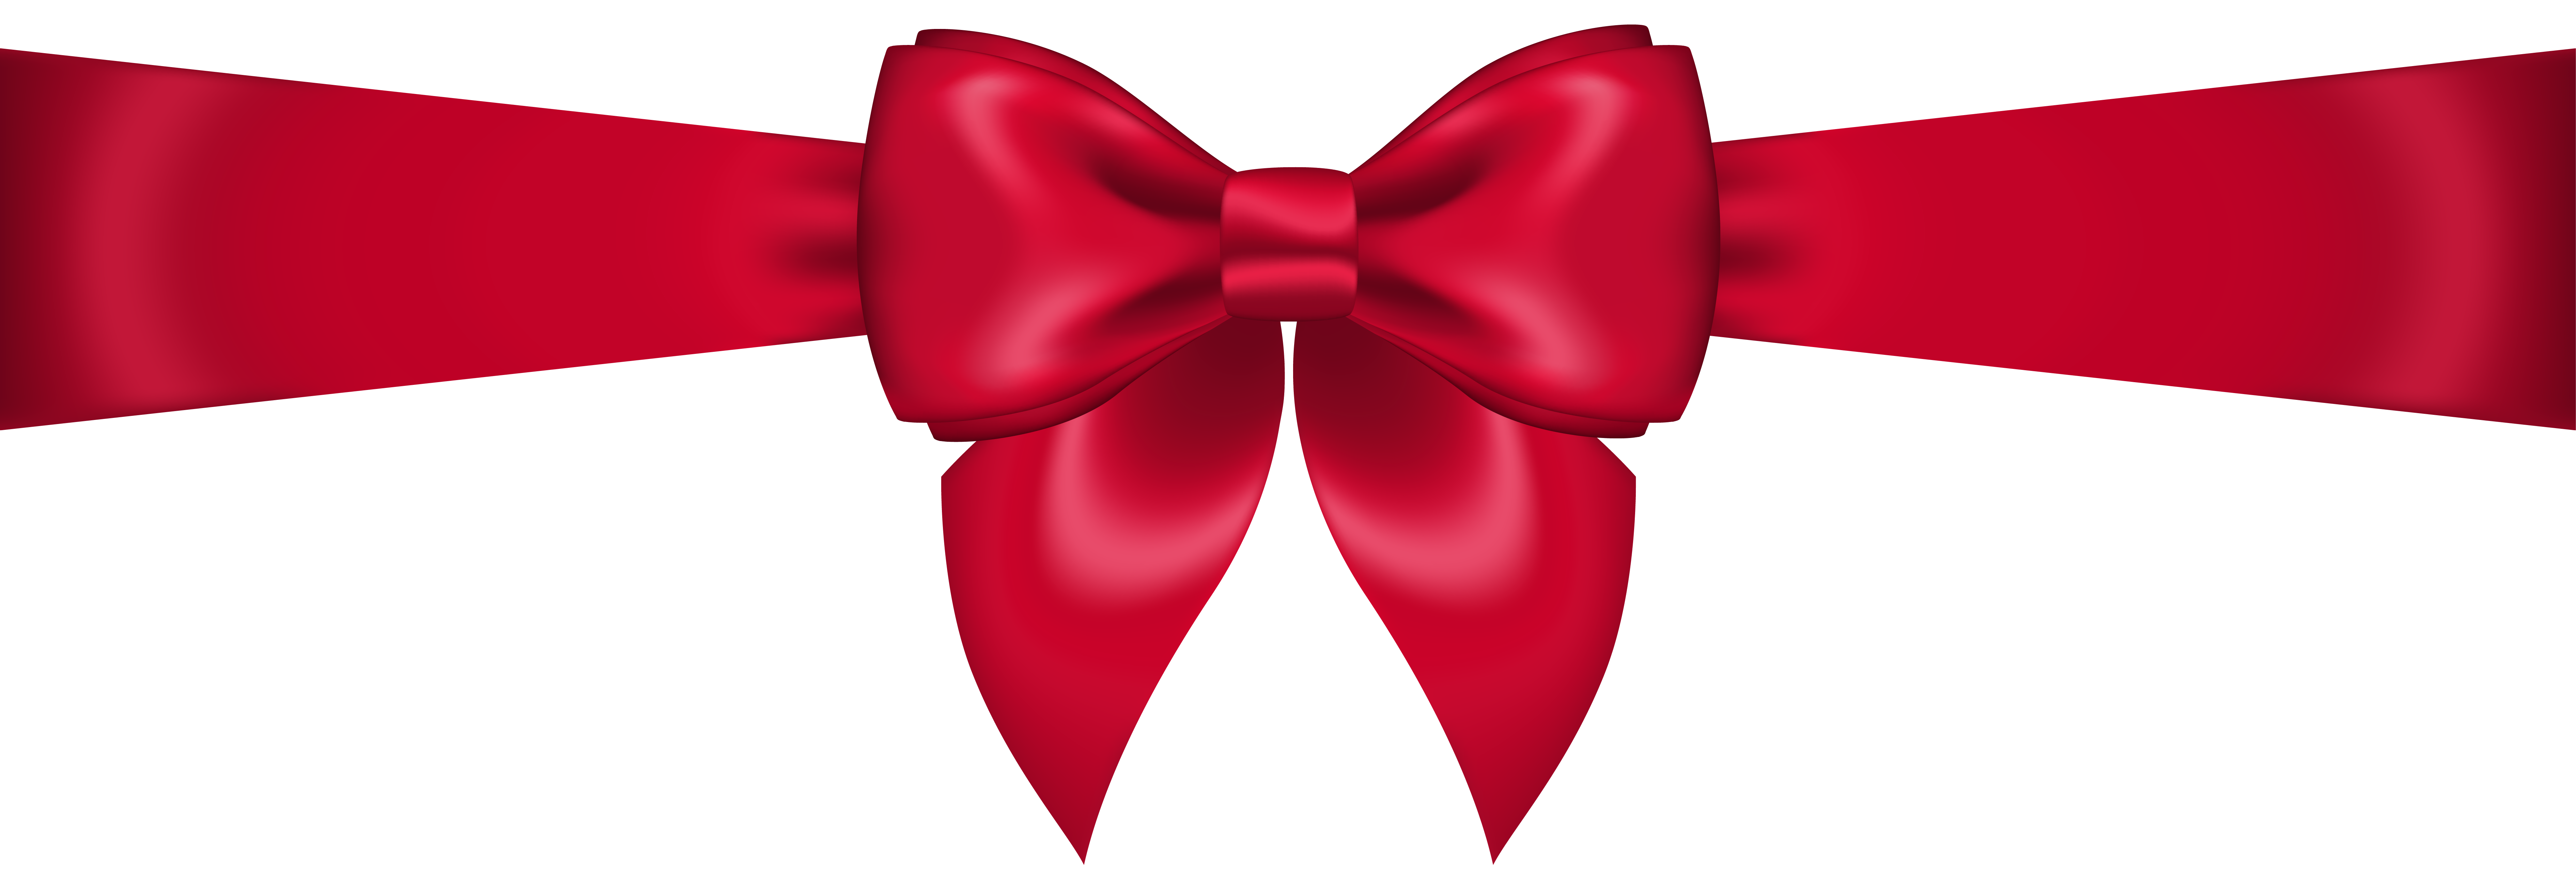 Red bow transparent clip art image 